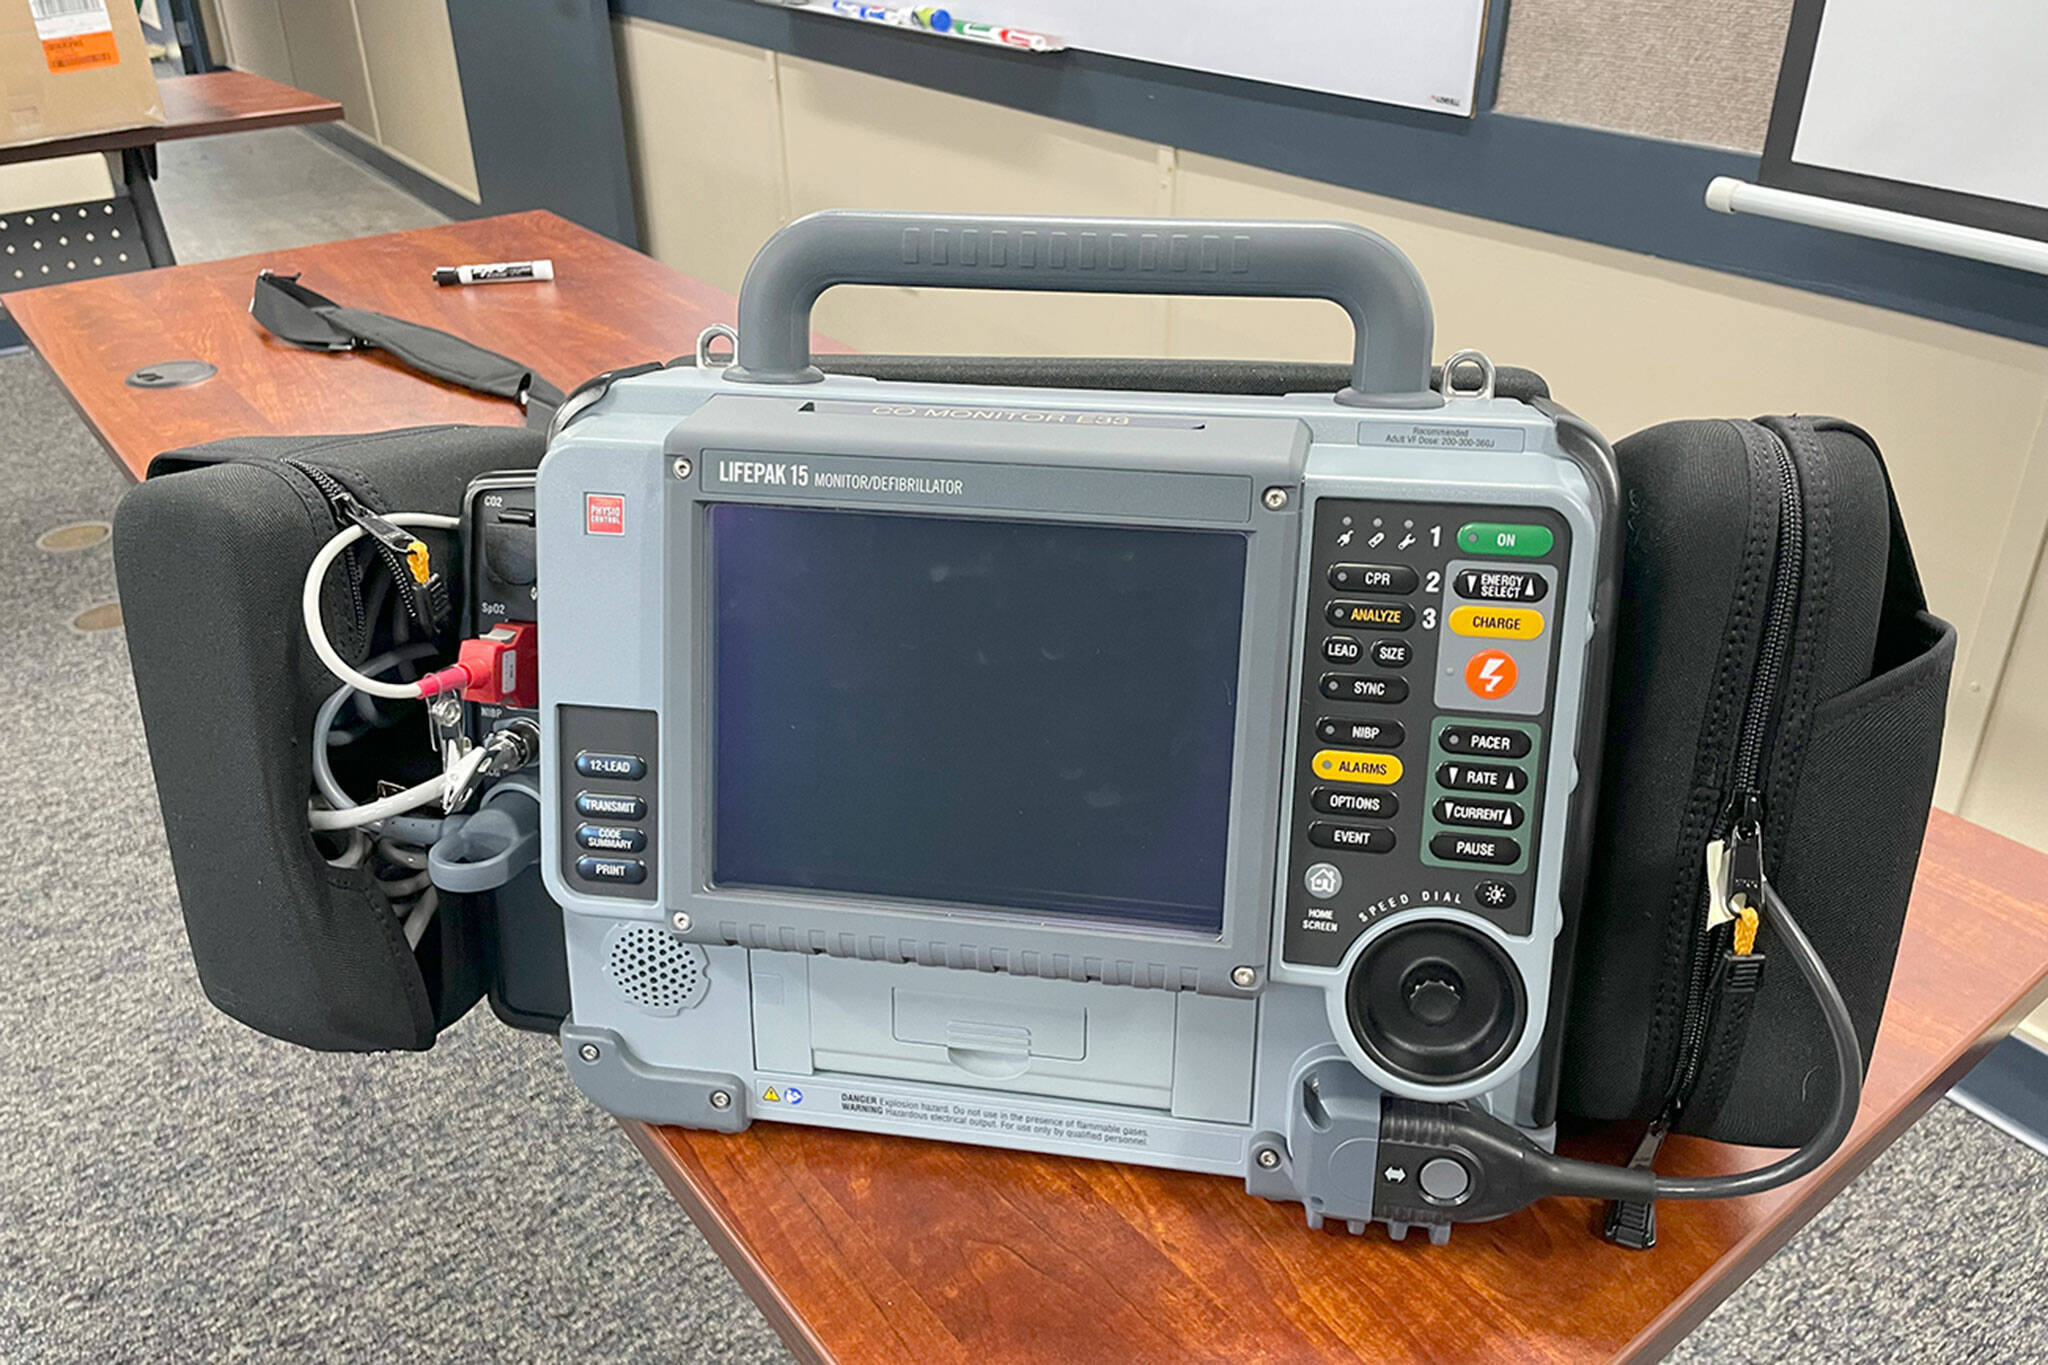 Sequim Gazette photo by Matthew Nash/ Clallam County Fire District 3 recently upgraded its cardiac monitors/defibrillators to LIFEPAK-15 devices on its ambulances and fire engines that Capt. Kolby Konopaski said are “the latest and greatest.”